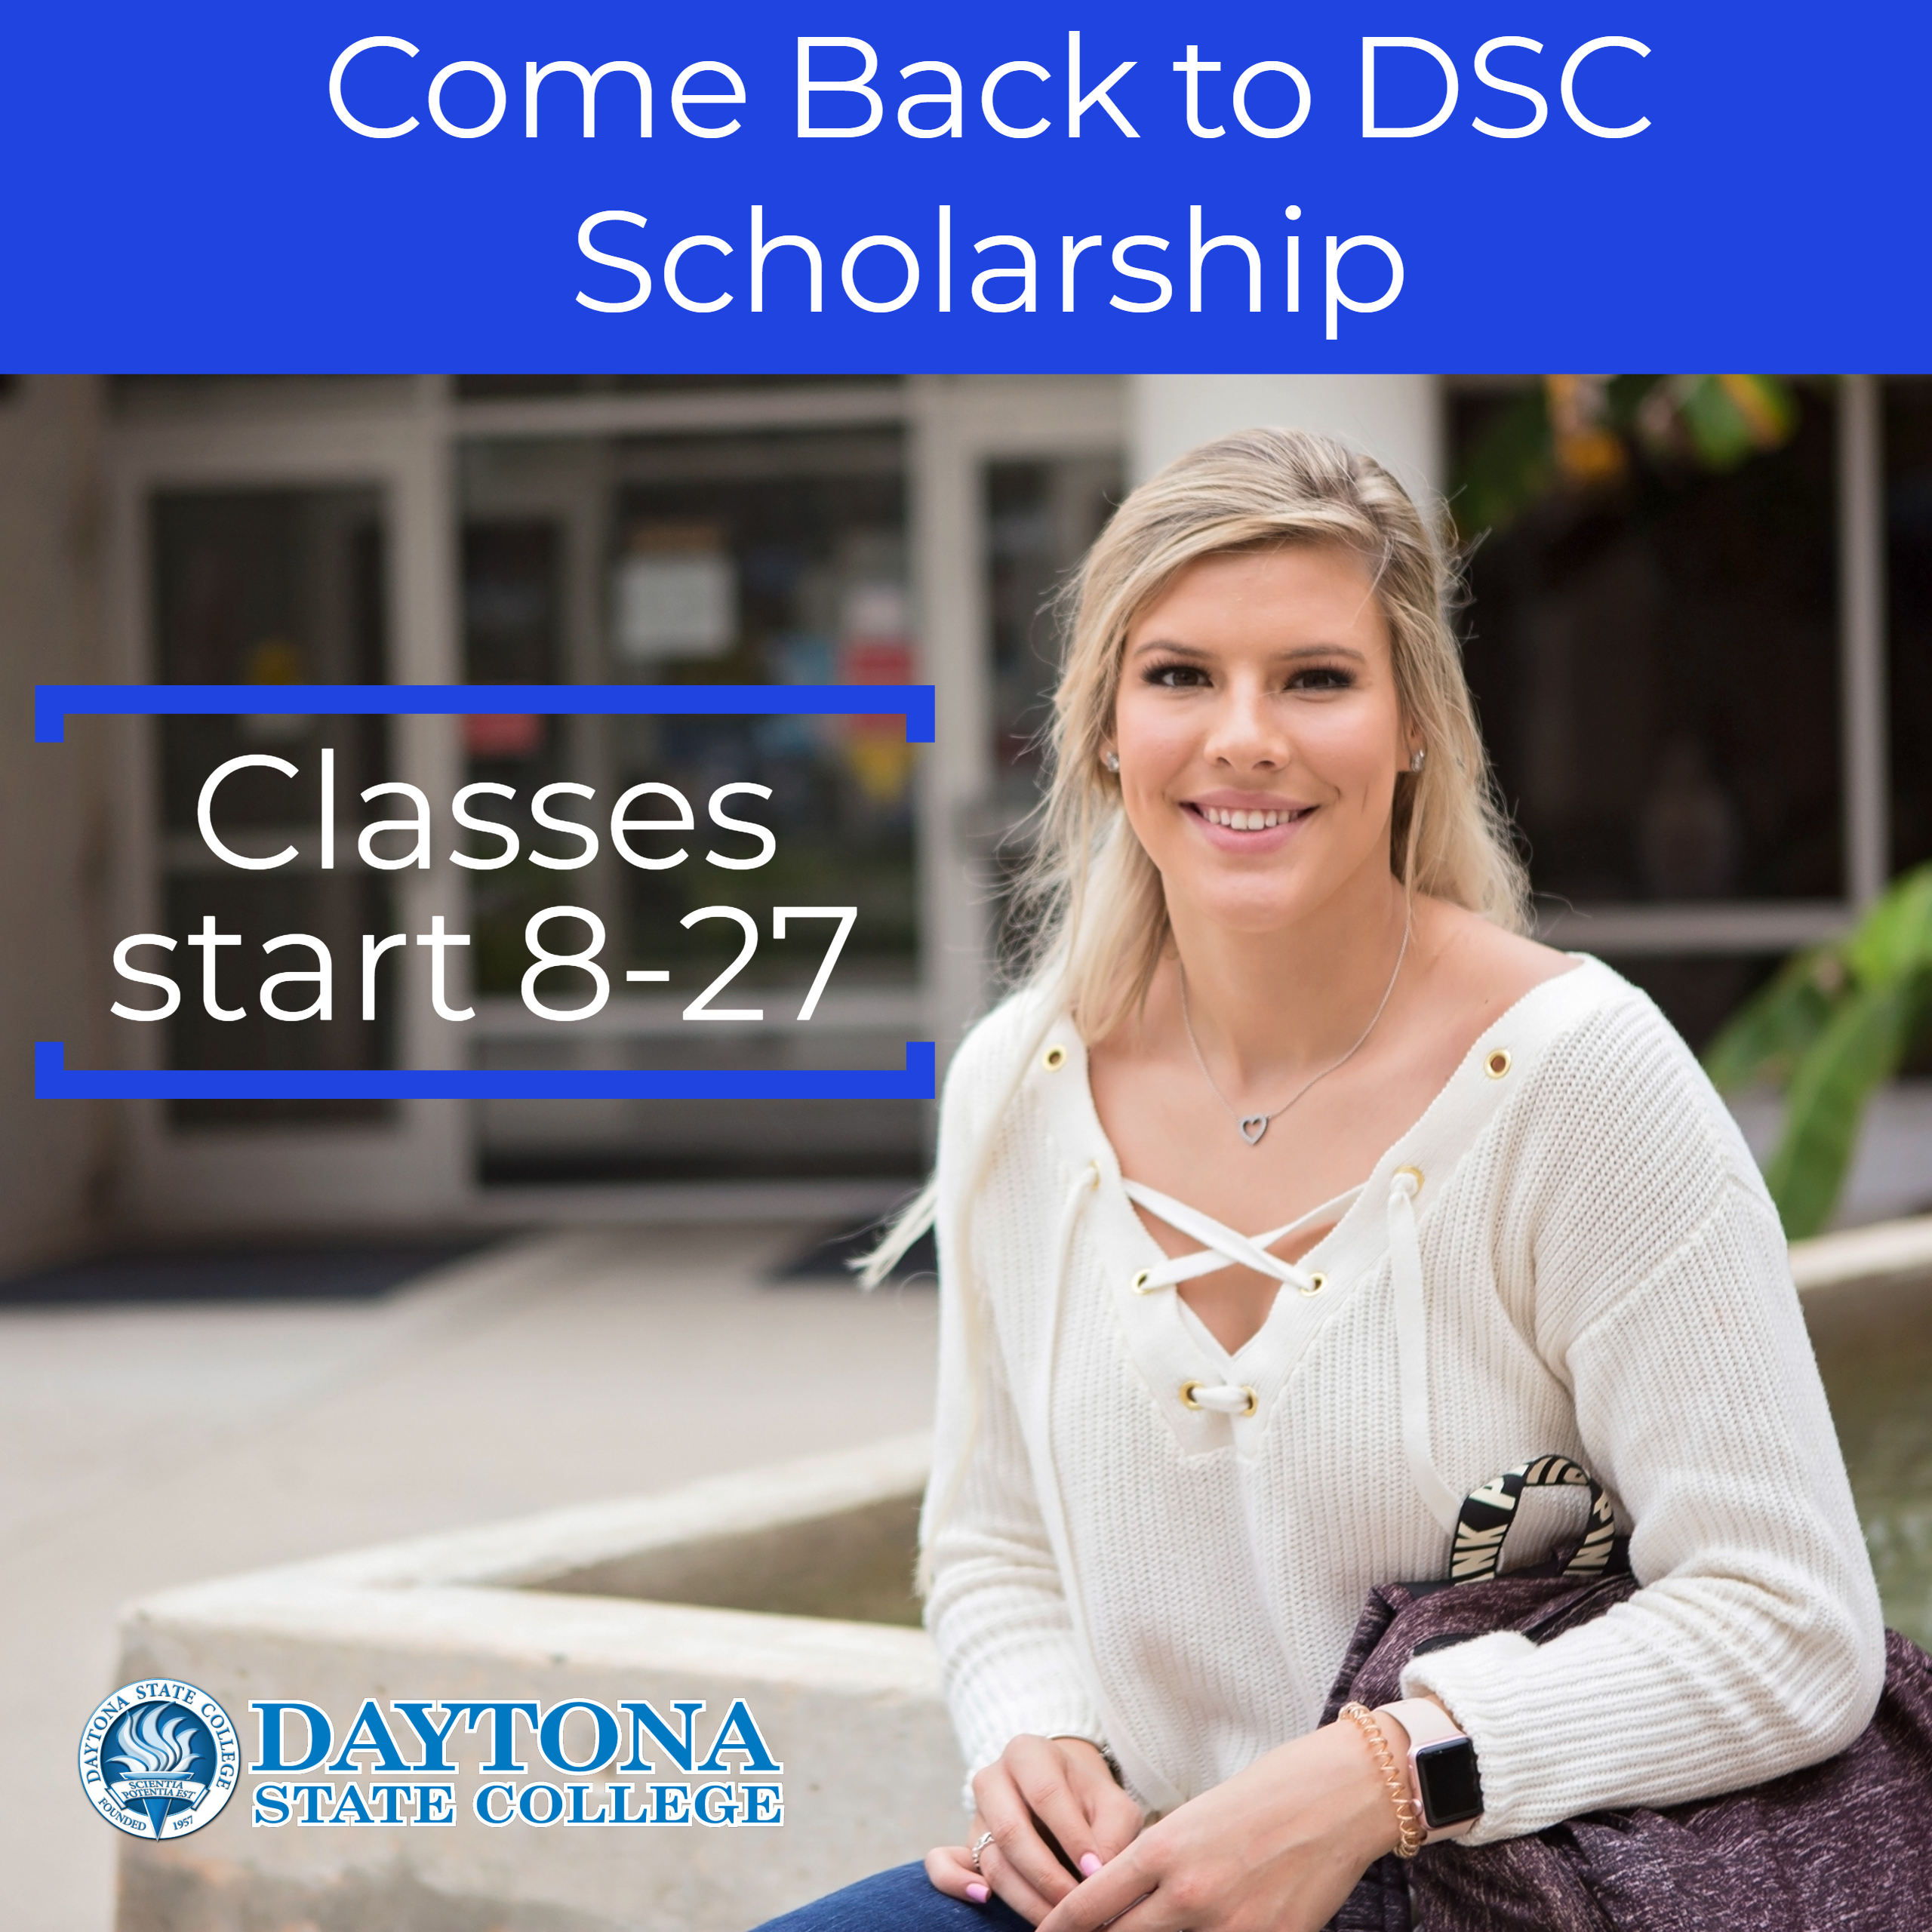 DSC urges students to “Come Back” and complete their programs